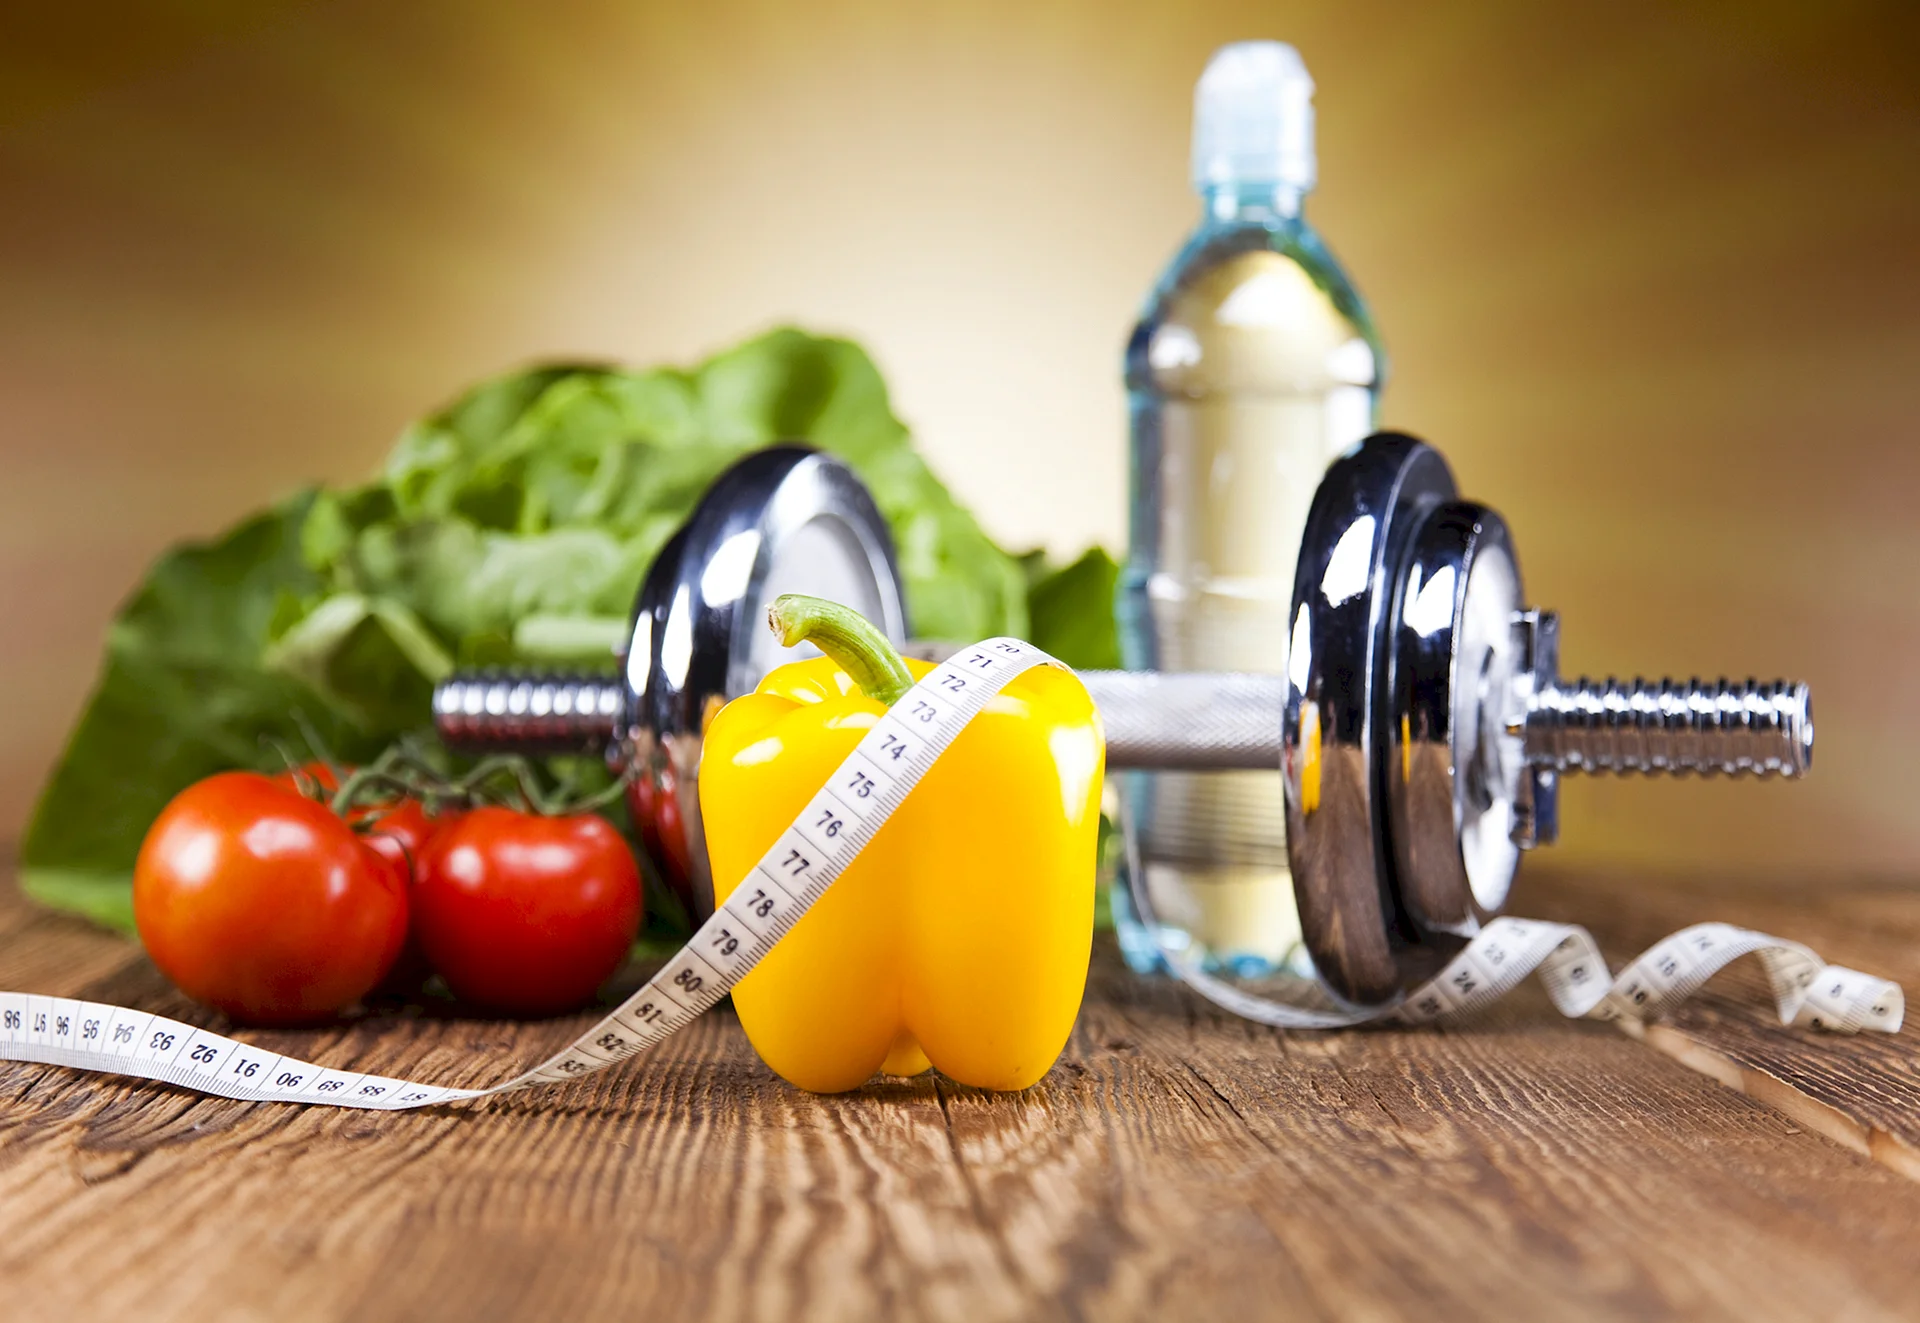 Healthy Lifestyle Wallpaper